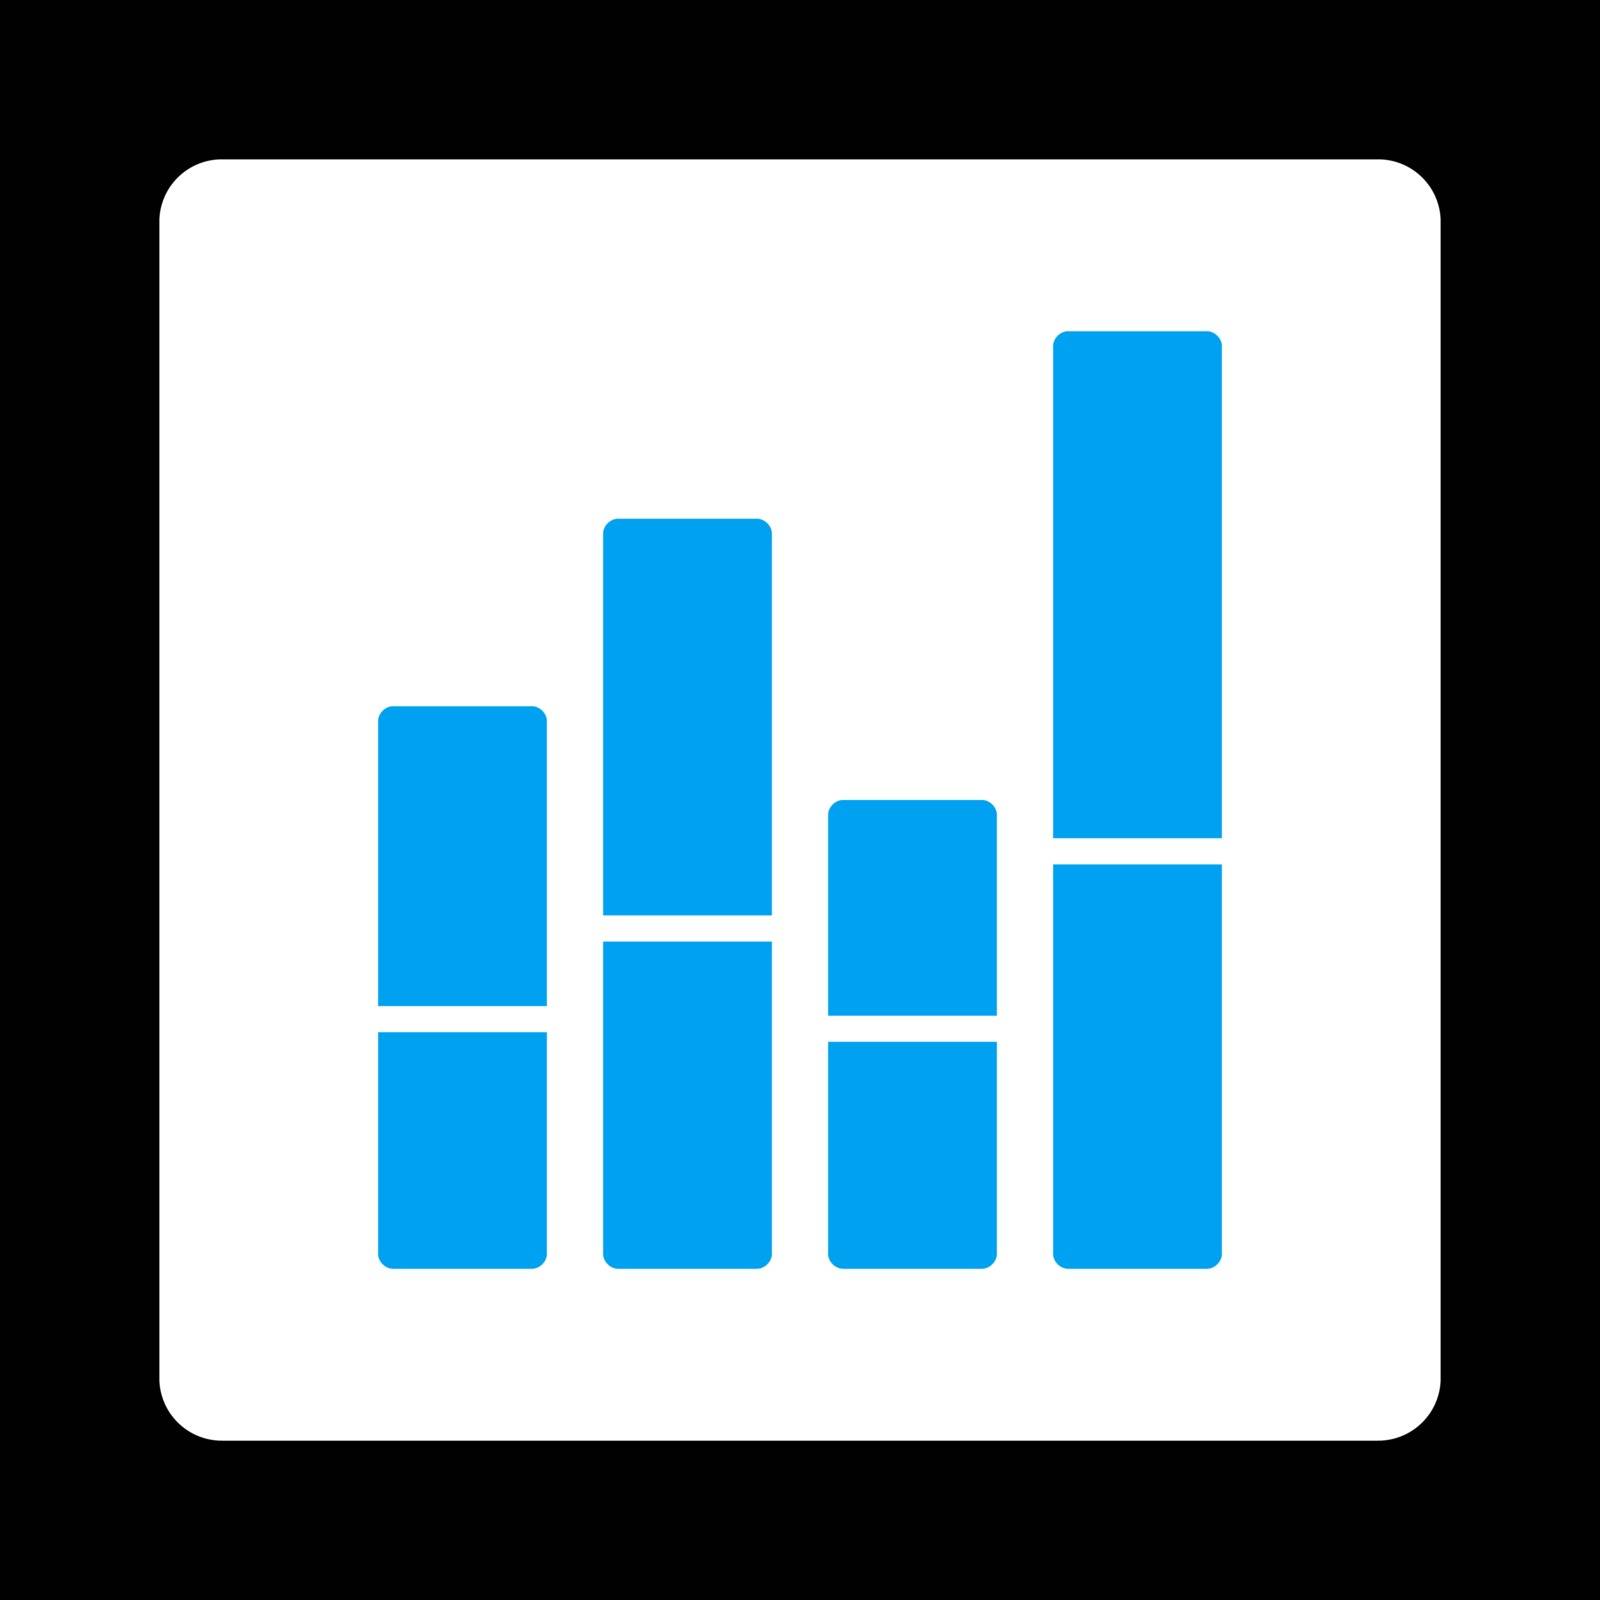 Bar Chart vector icon. This flat rounded square button uses blue and white colors and isolated on a black background.